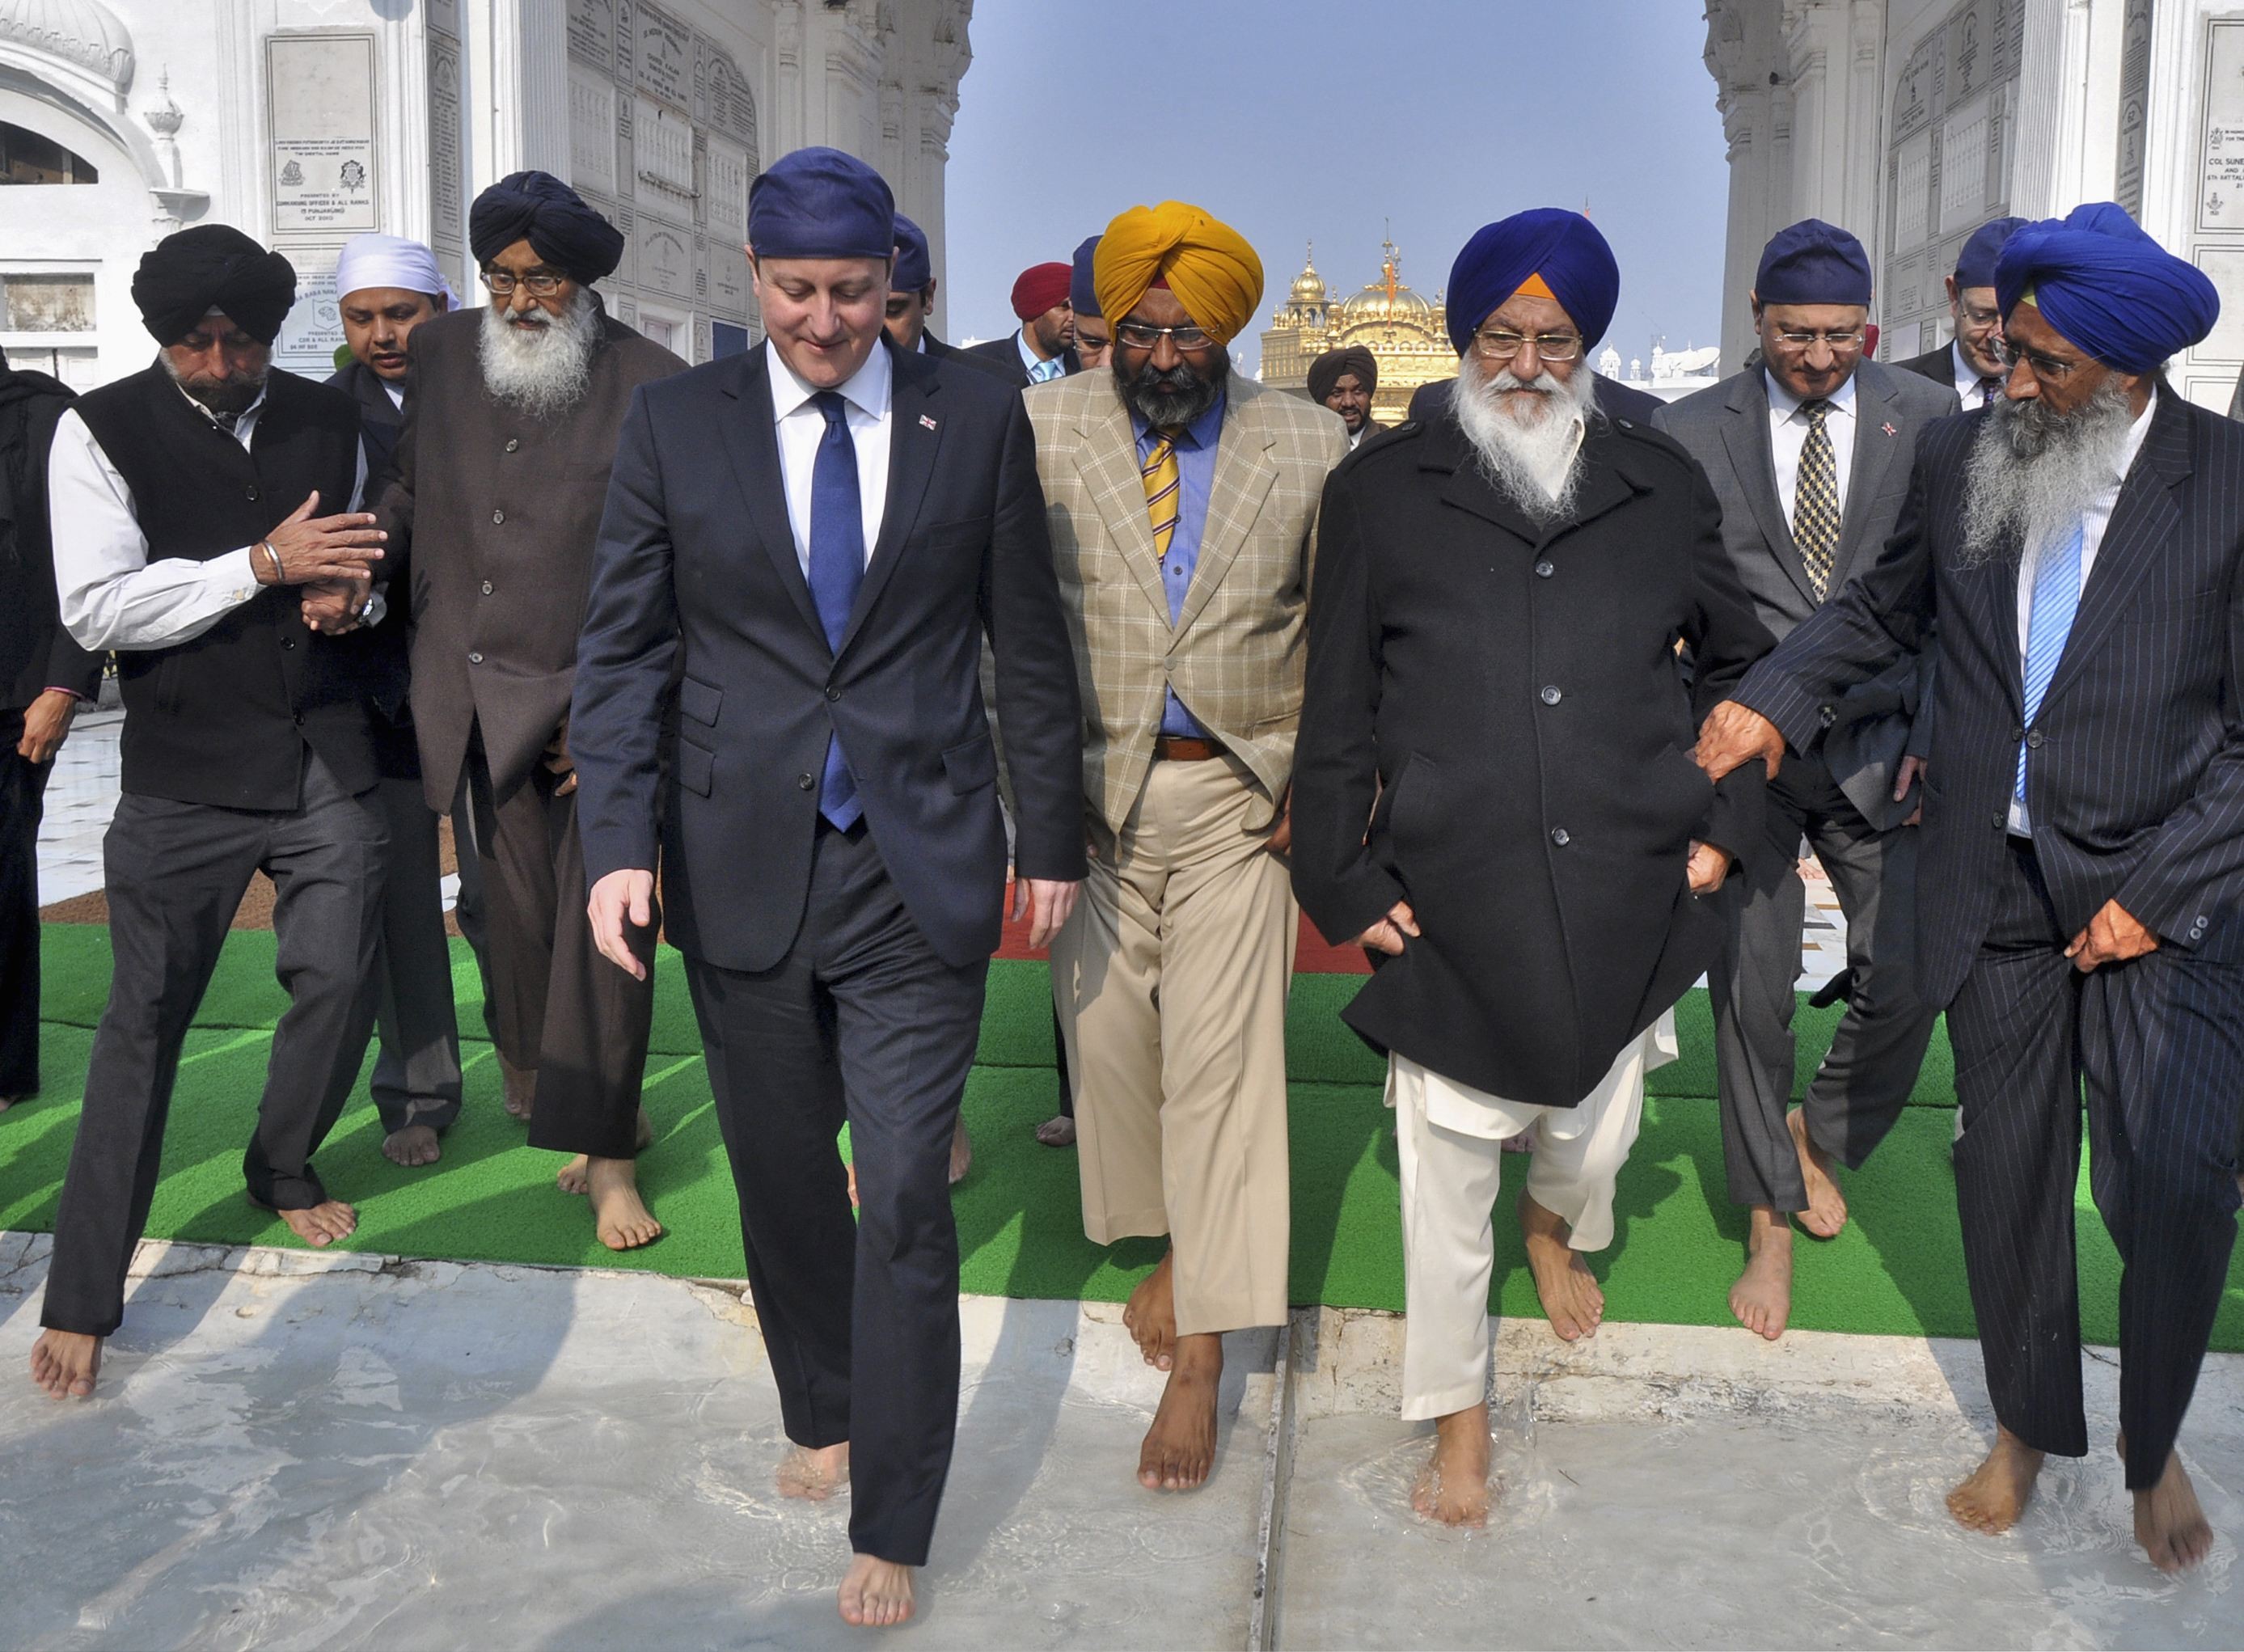 Former UK prime minister David Cameron in 2013 became the first British leader to voice regret about the Amritsar massacre of 1919. Photo: AFP